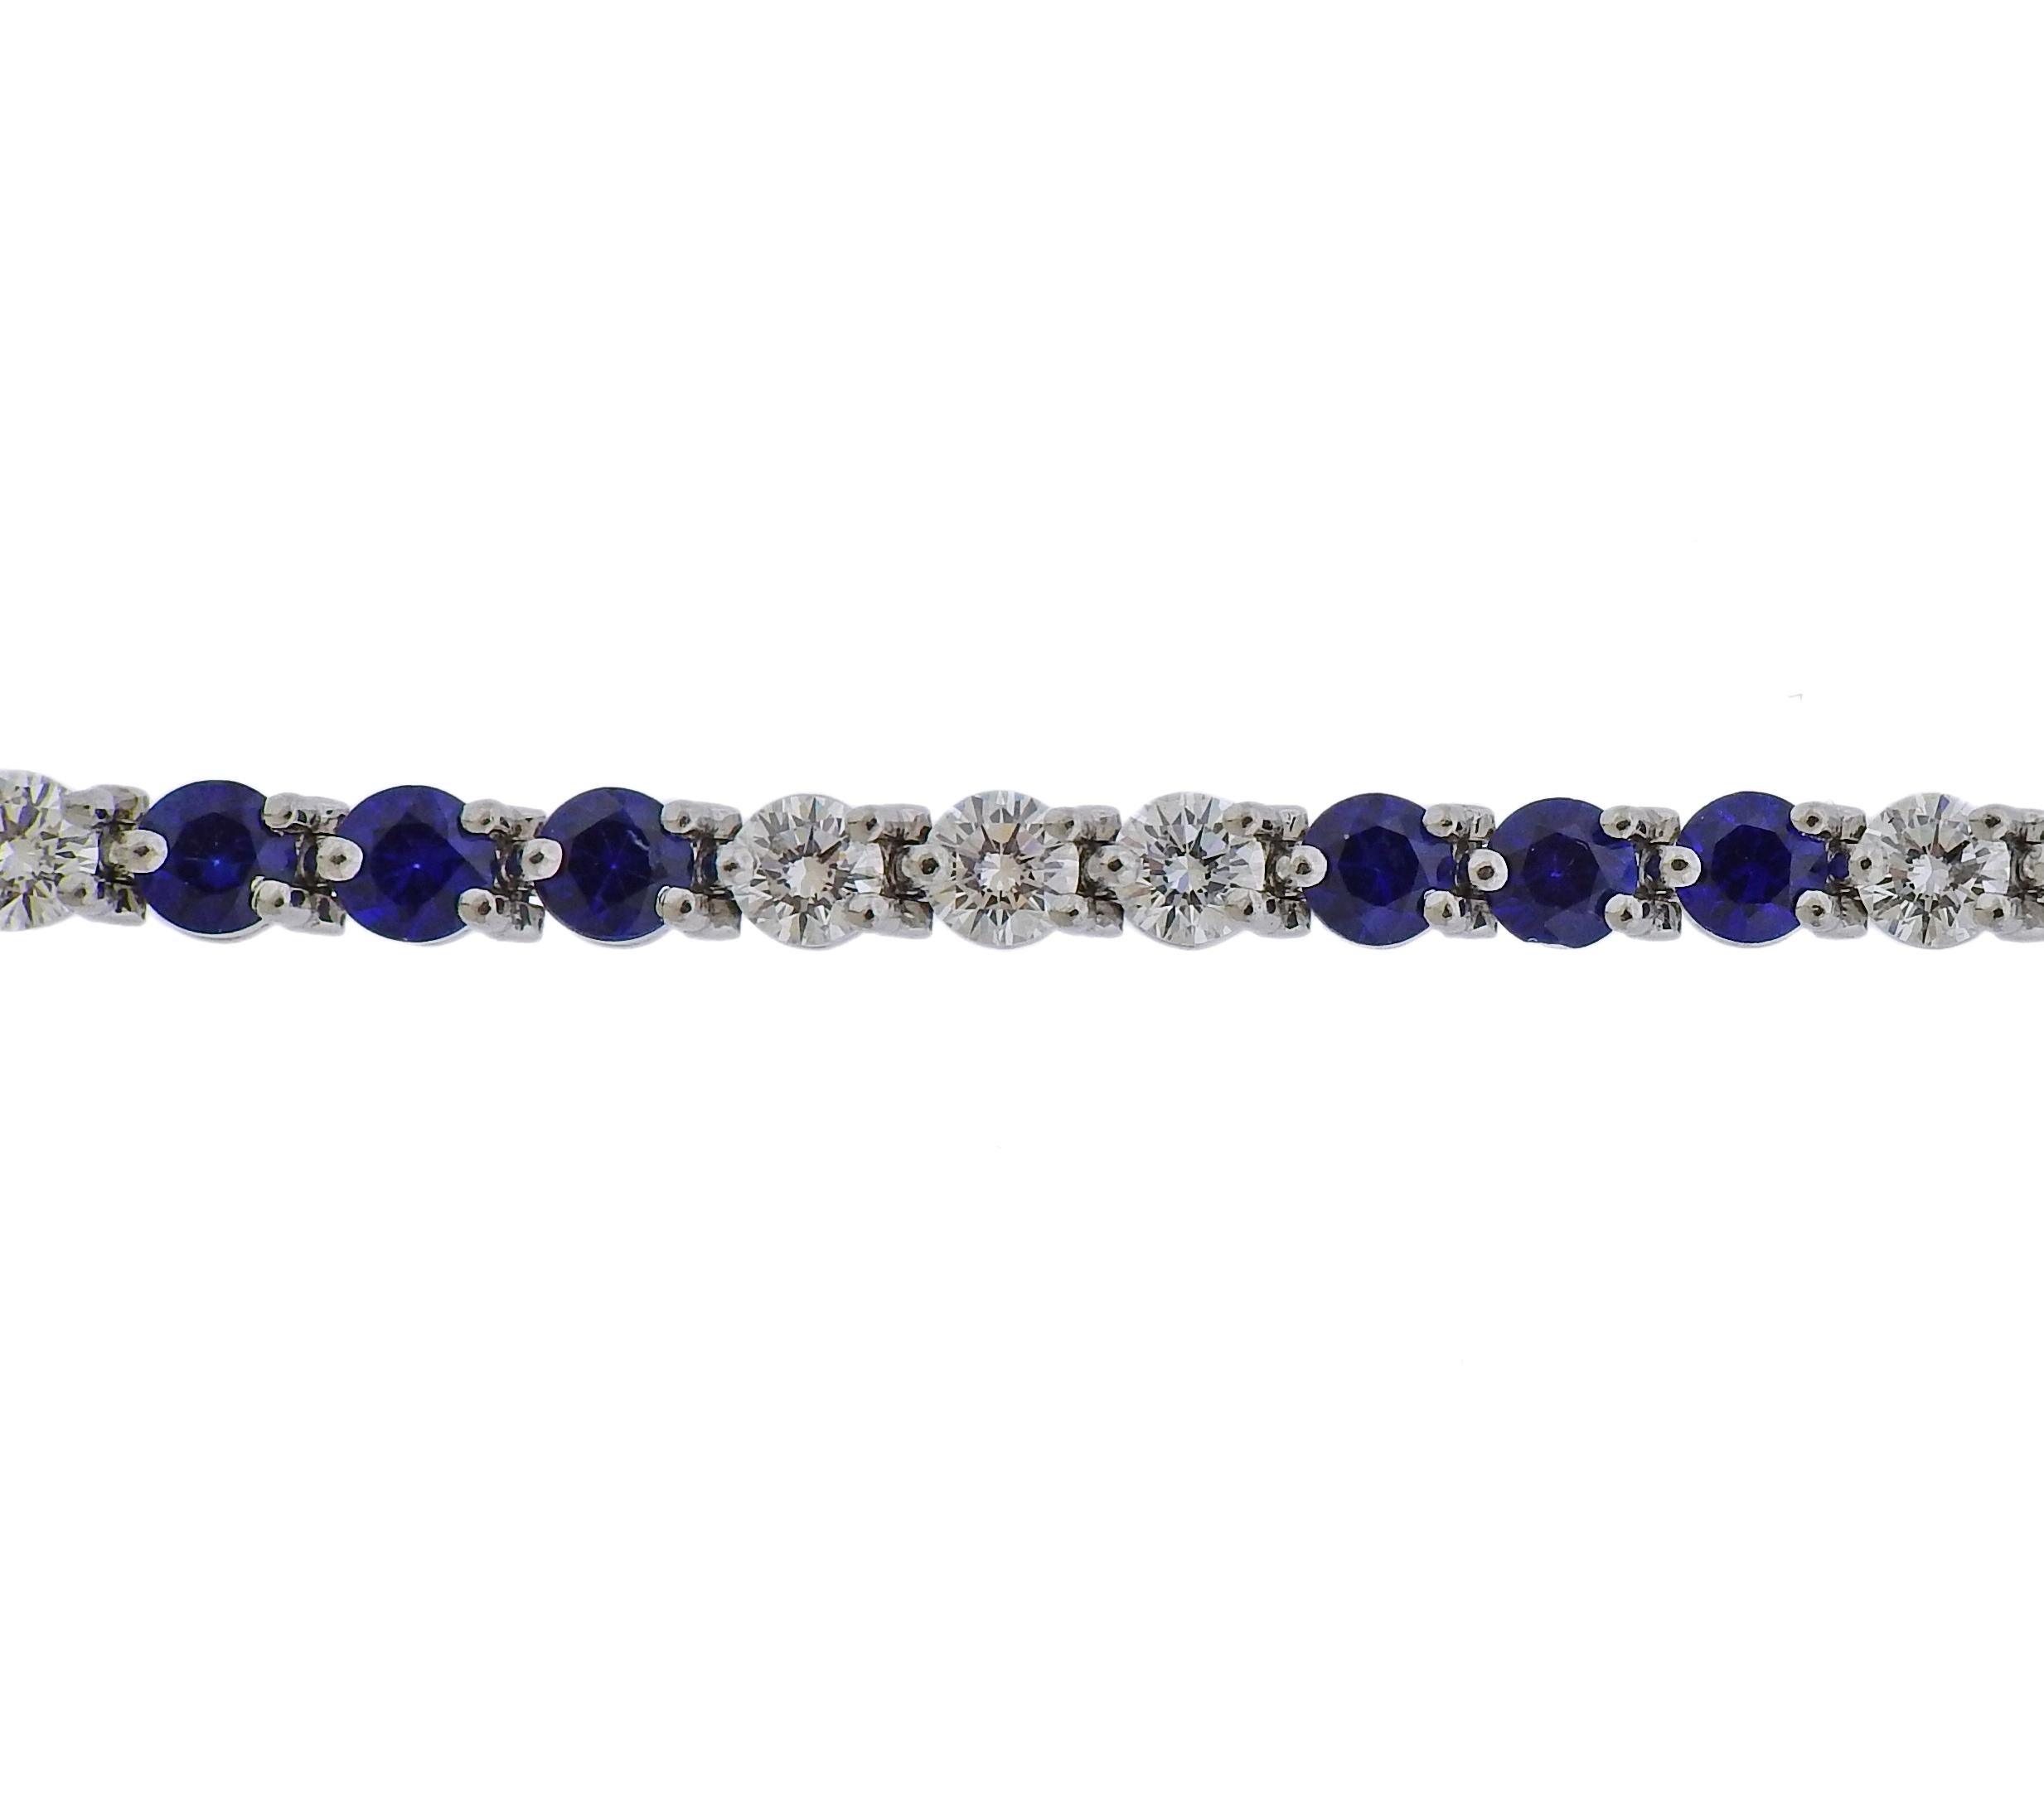 Classic platinum Victoria bracelet by Tiffany & Co, set with approx. 4.15ctw in blue sapphires and 3.24ctw in H/VS diamonds. Bracelet is 6 3/4